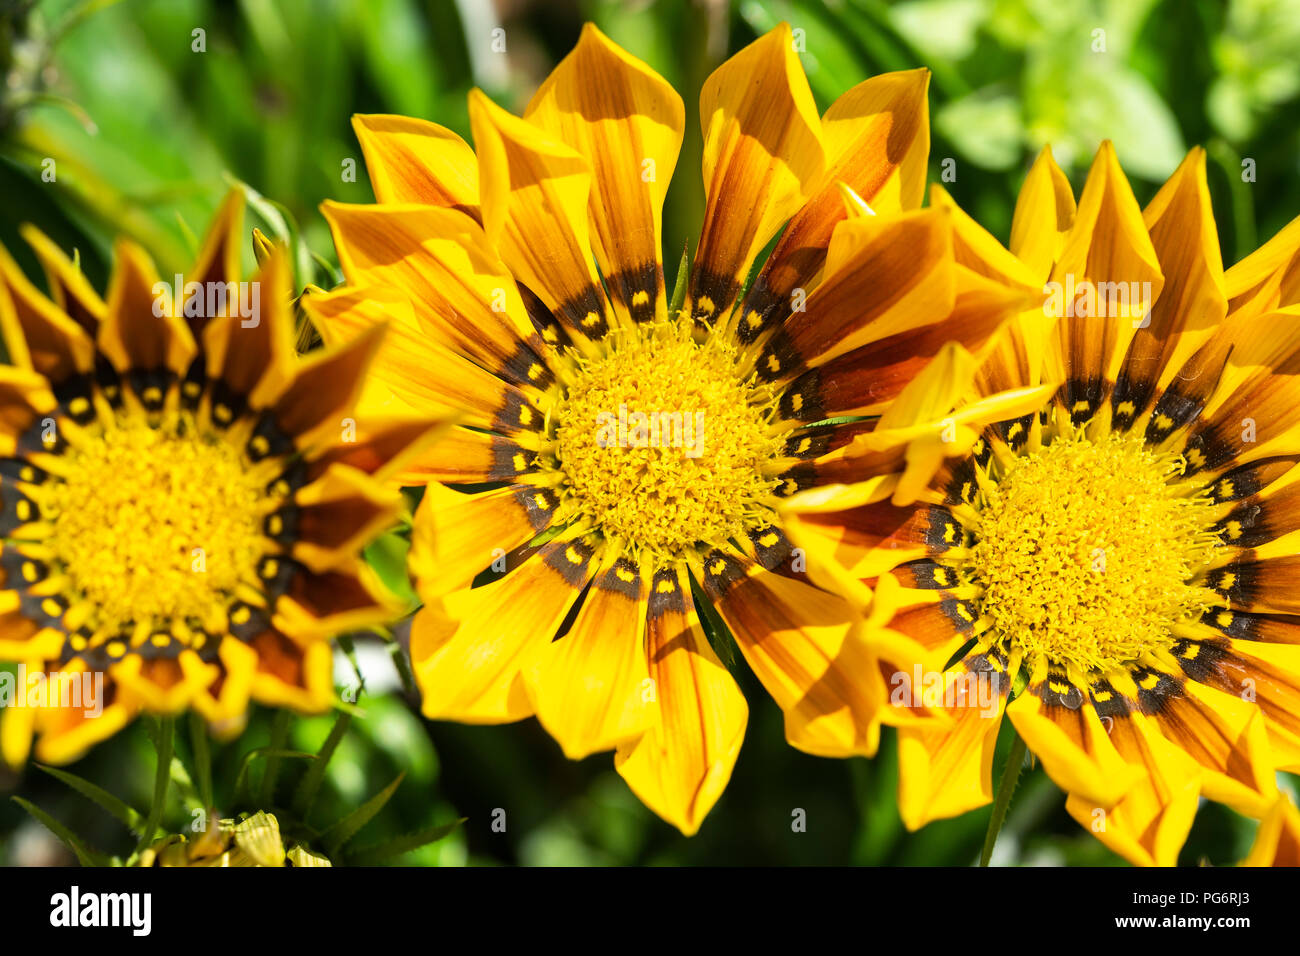 Yellow and brown Gazania Rigens flowers growing in Lower Austria Stock Photo